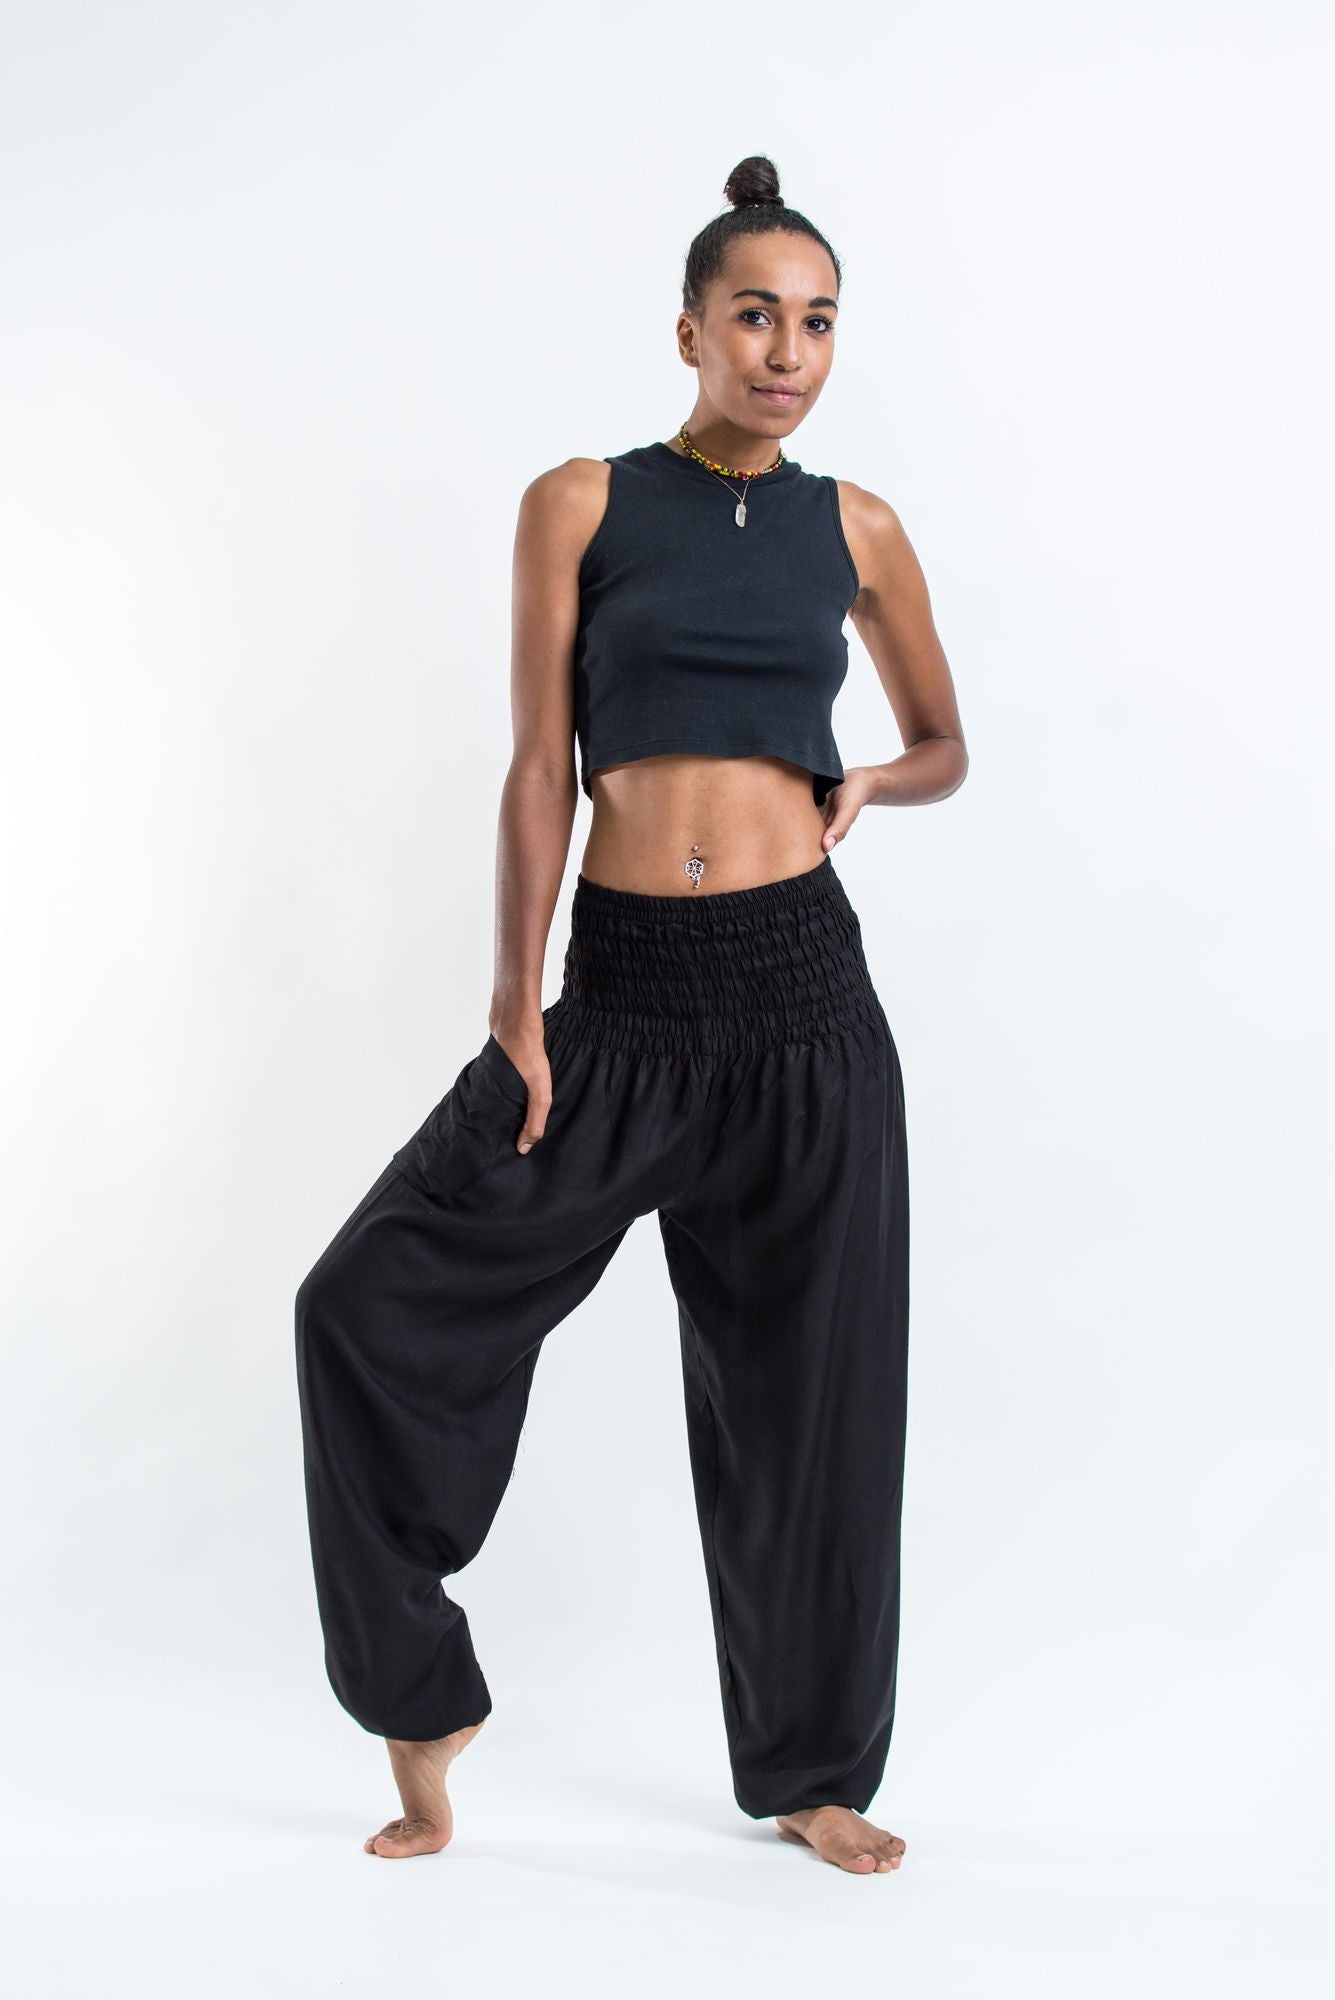 Go Colors Women Solid Black Viscose Harem Pants Buy Go Colors Women Solid  Black Viscose Harem Pants Online at Best Price in India  Nykaa